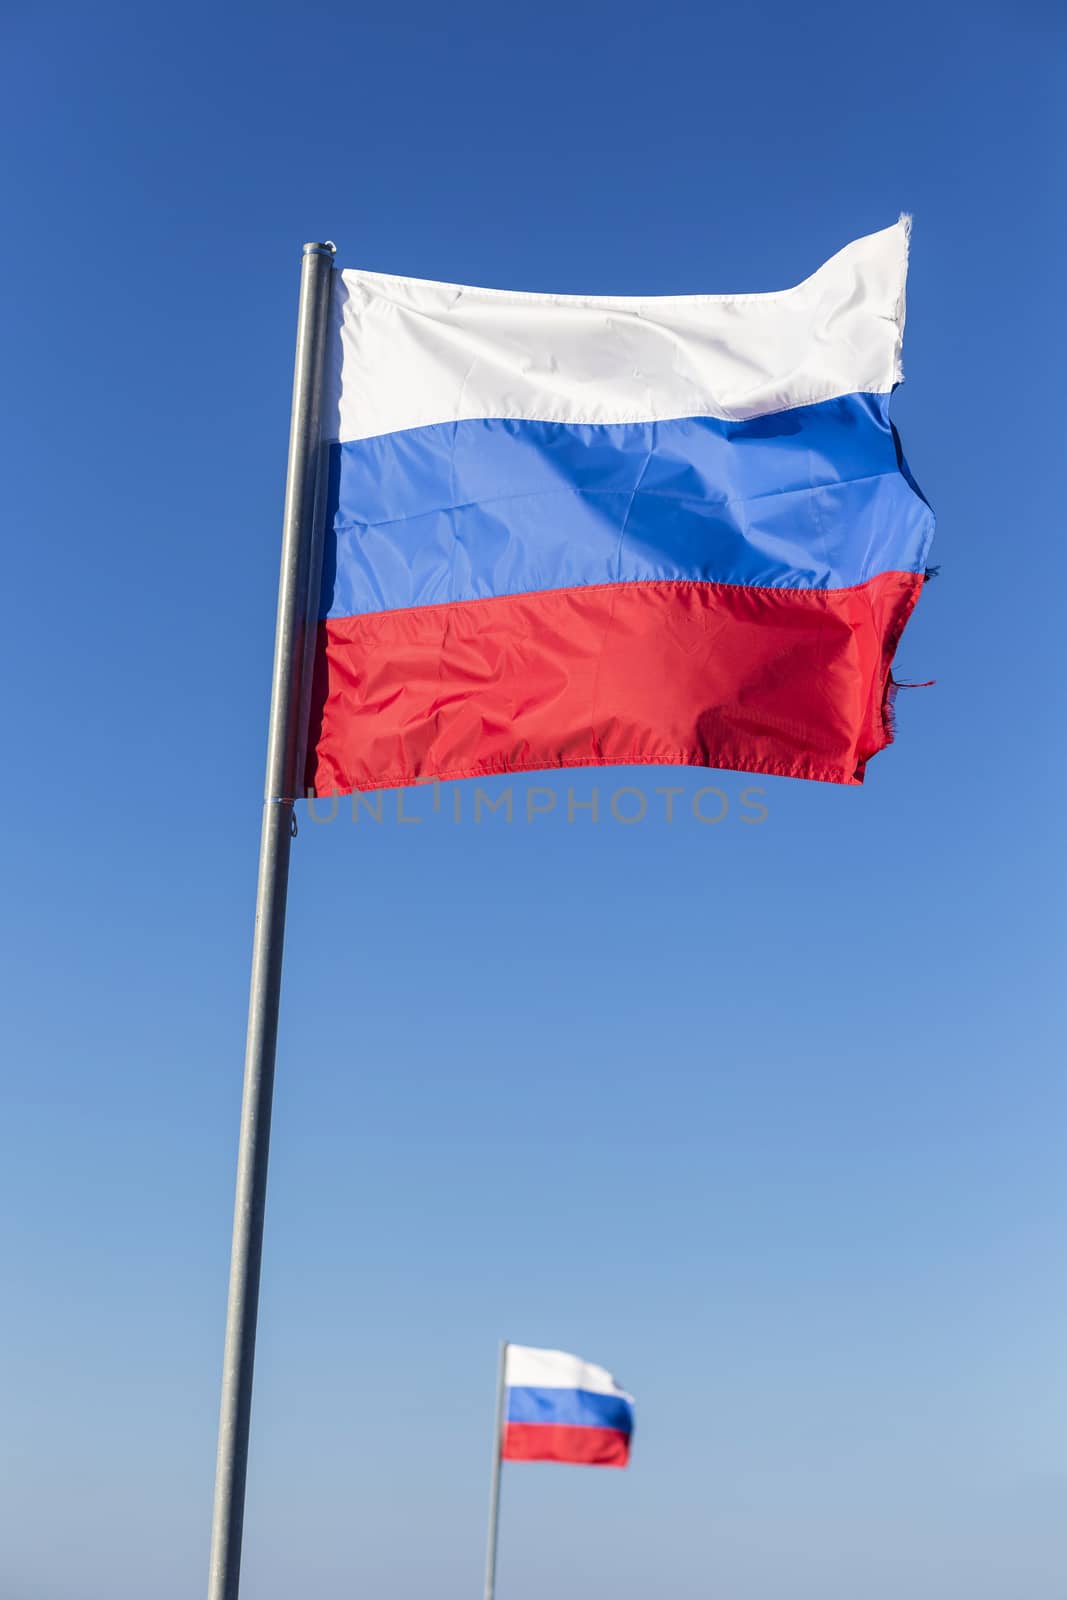 Russian flag, growing in the wind with blue sky as background